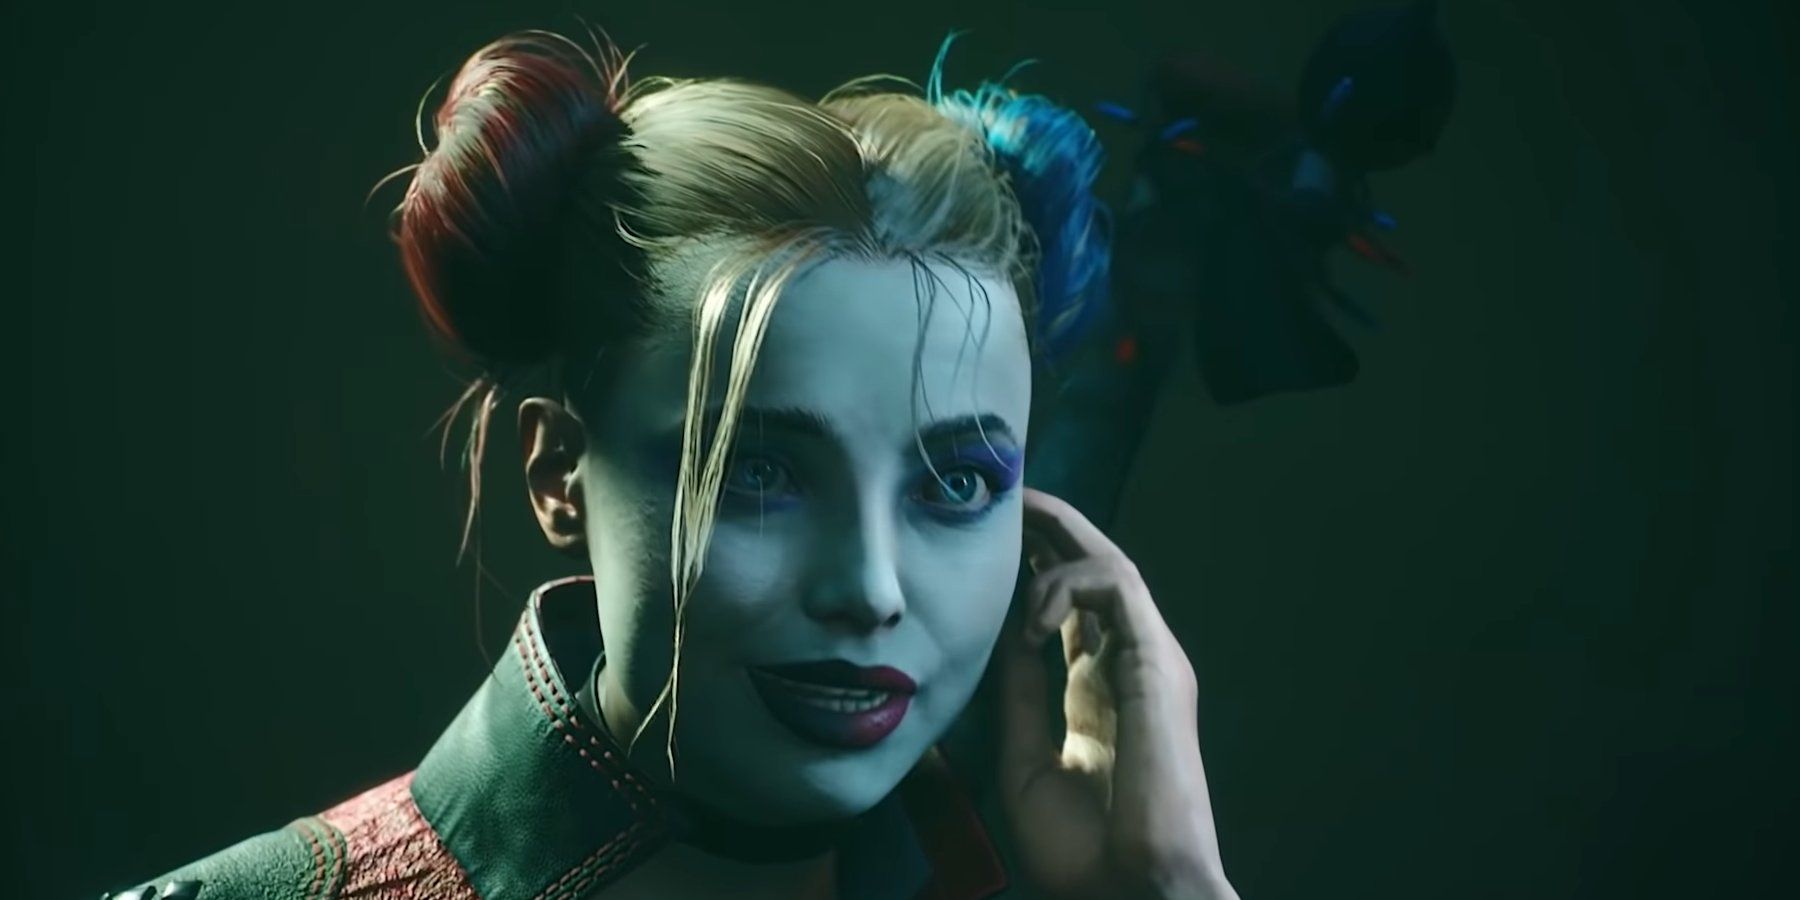 Harley Quinn is off to kill the Justice League in the Suicide Squad game.